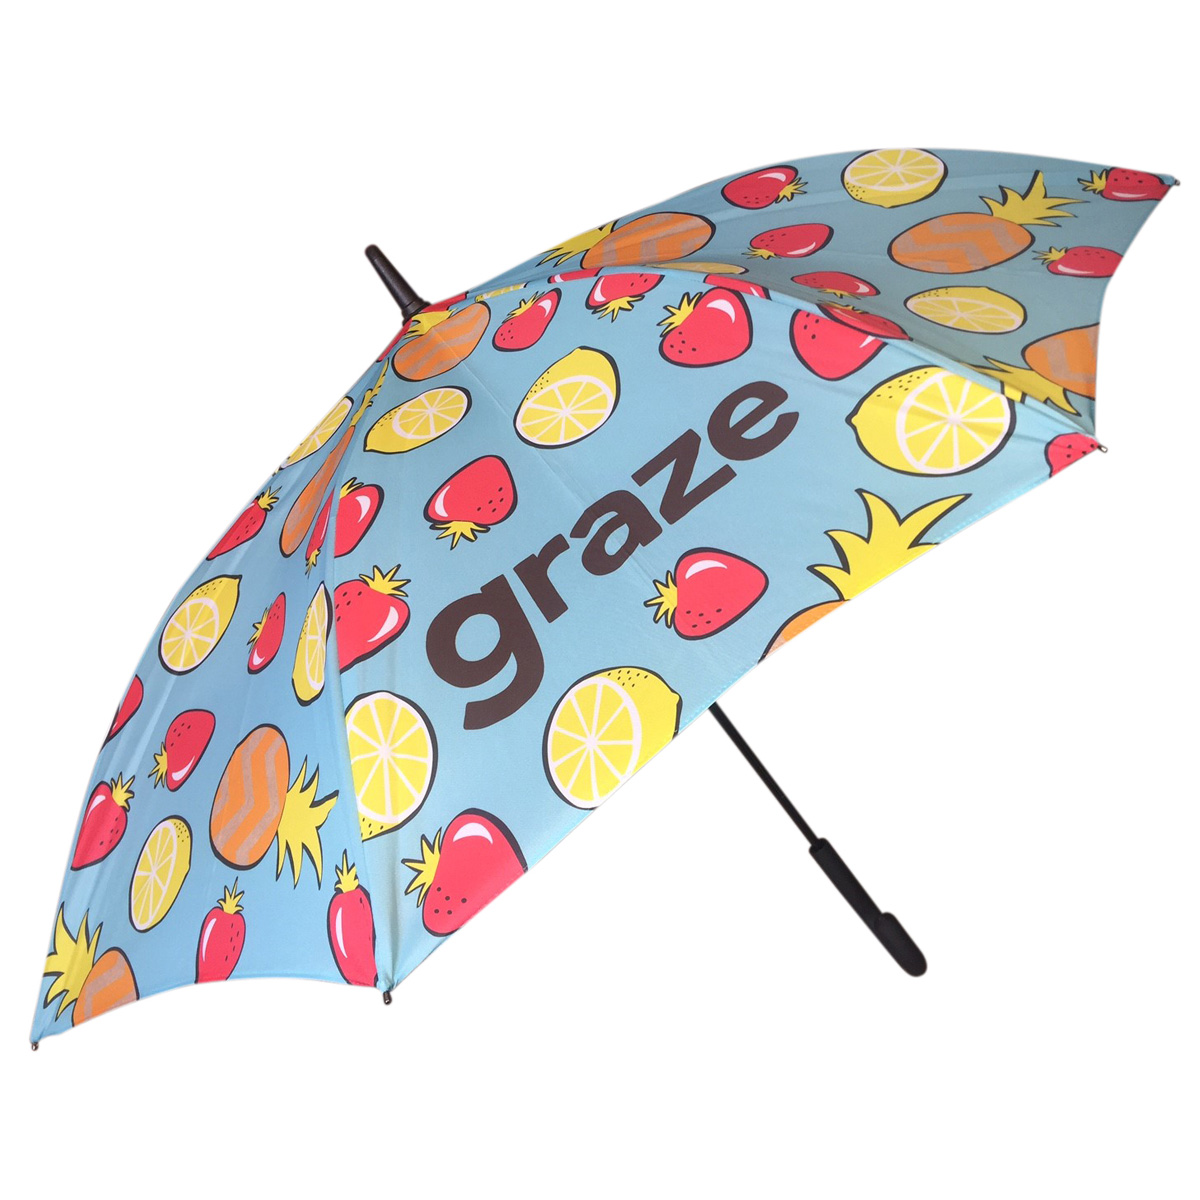 Promotional All-Over Print Umbrellas